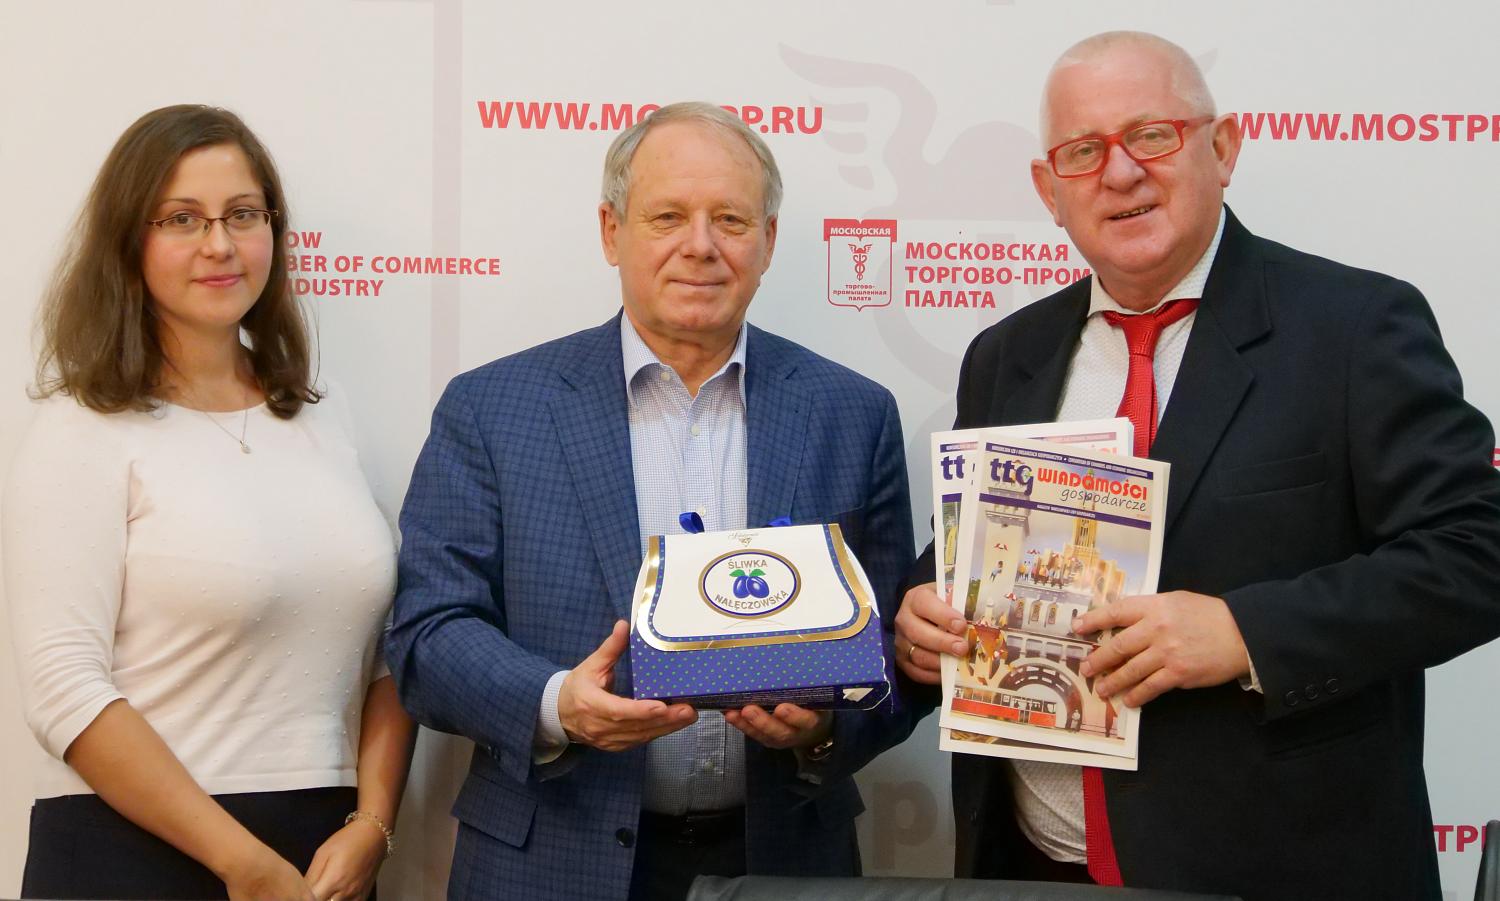 The President of the Warsaw Chamber of Commerce and Industry intends to initiate full cooperation with Moscows business